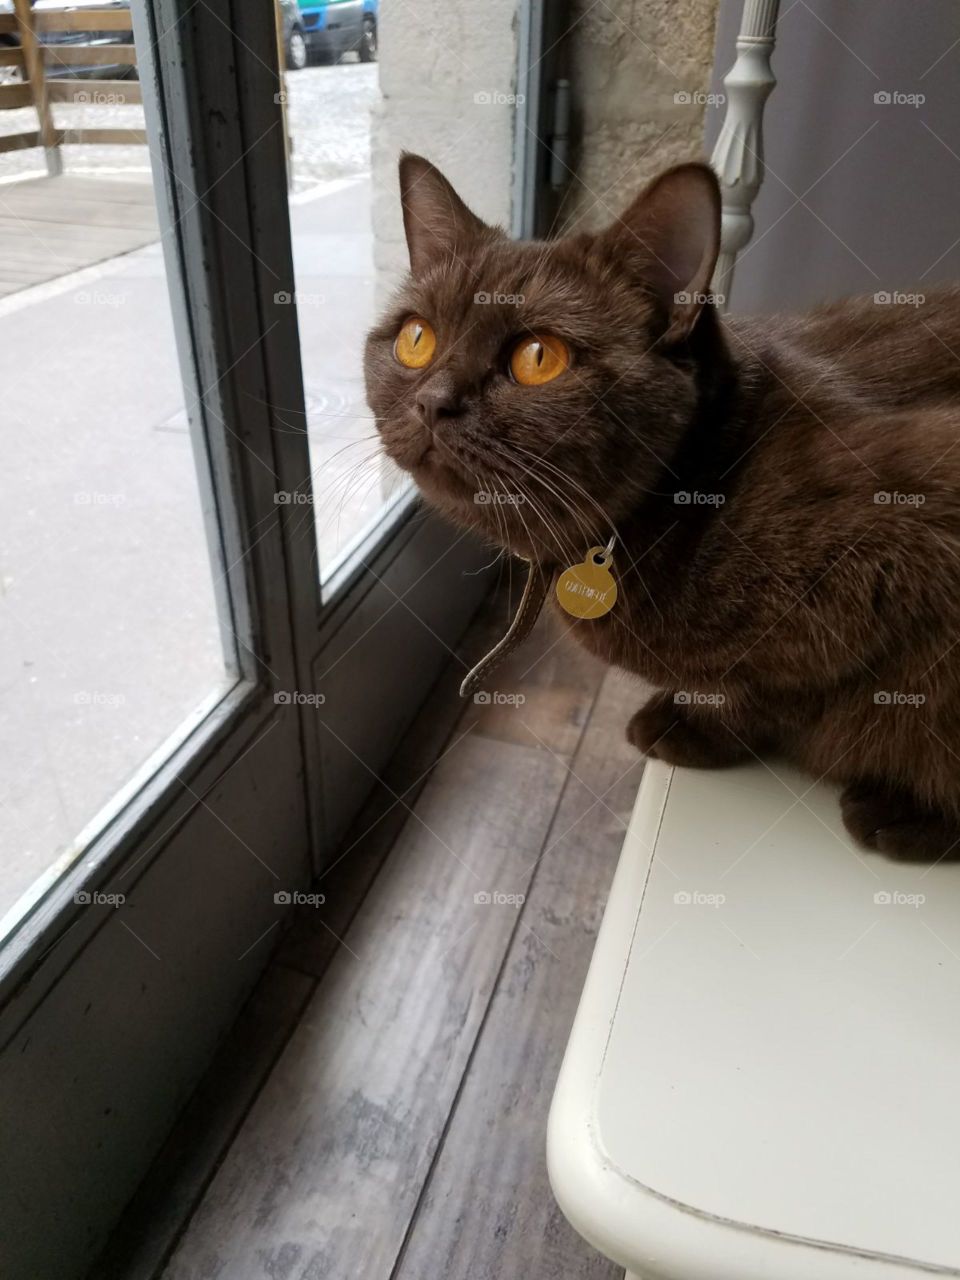 A cat at The Gentle Cat in Lyon, France